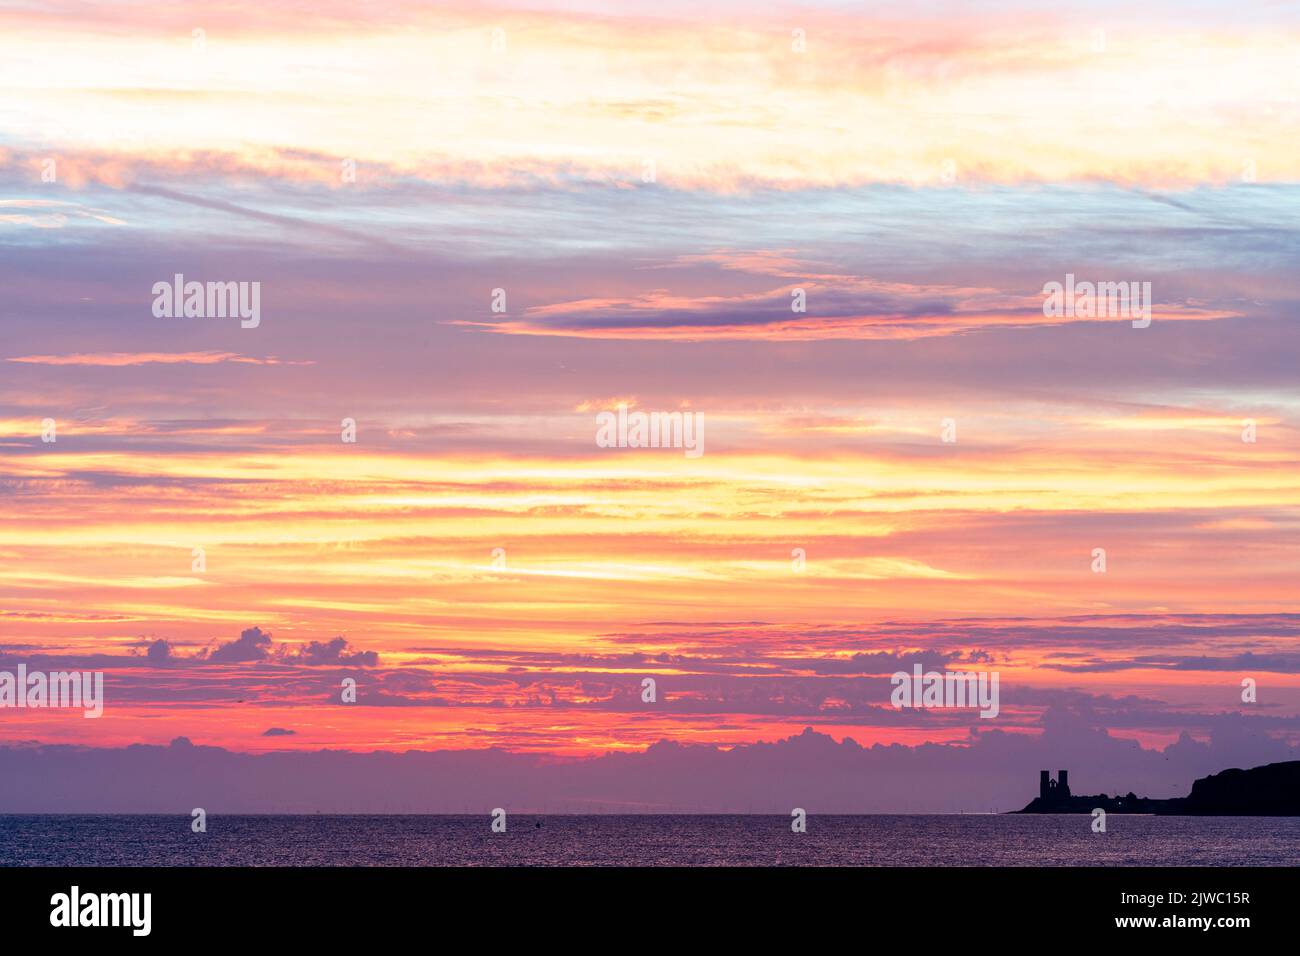 Scattered cloud in the dawn sky over the sea at the Kent coast at Reculver. The multi-coloured clouds are lit from underneath by the rising sun still below the horizon. In the distance is the twin towers of the ruined 12th century Reculver church. Stock Photo